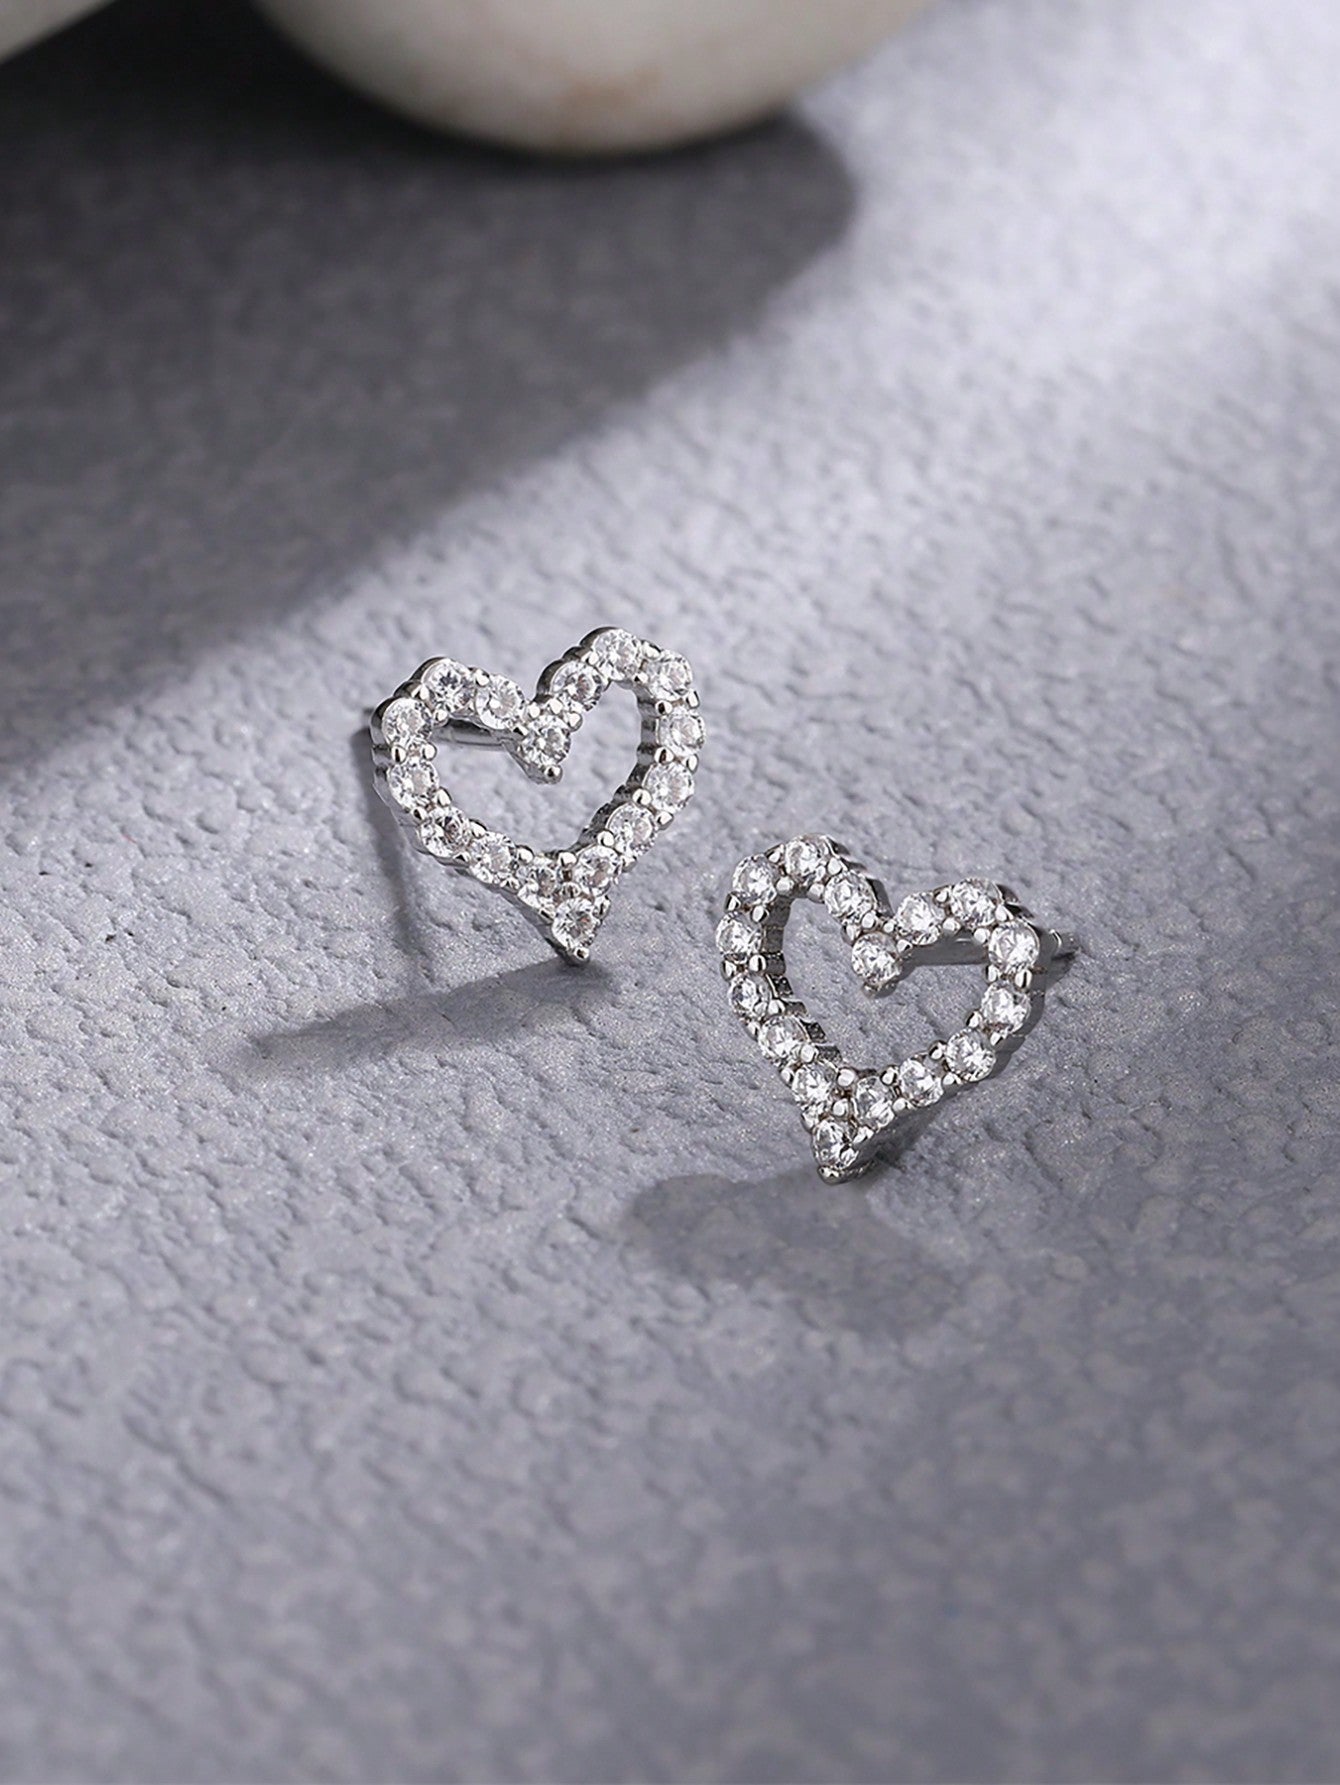 1pair Small Silver Cubic Zirconia Heart Stud Earrings Fine Jewelry Party Dating Gift For Women For Girls